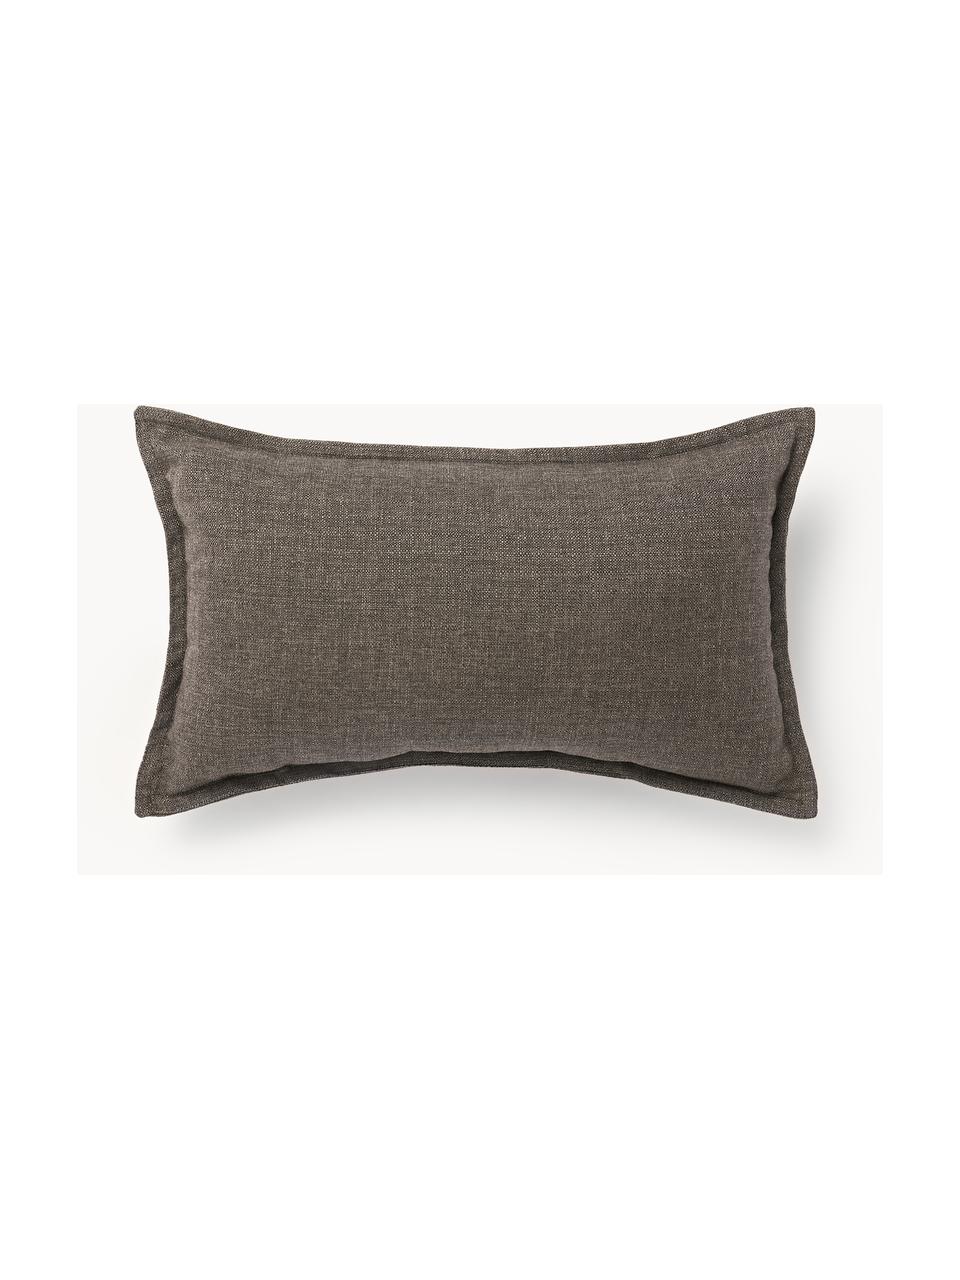 Outdoor-Kissen Oline, Hülle: 60 % Baumwolle, 40 % Poly, Taupe, B 30 x L 50 cm